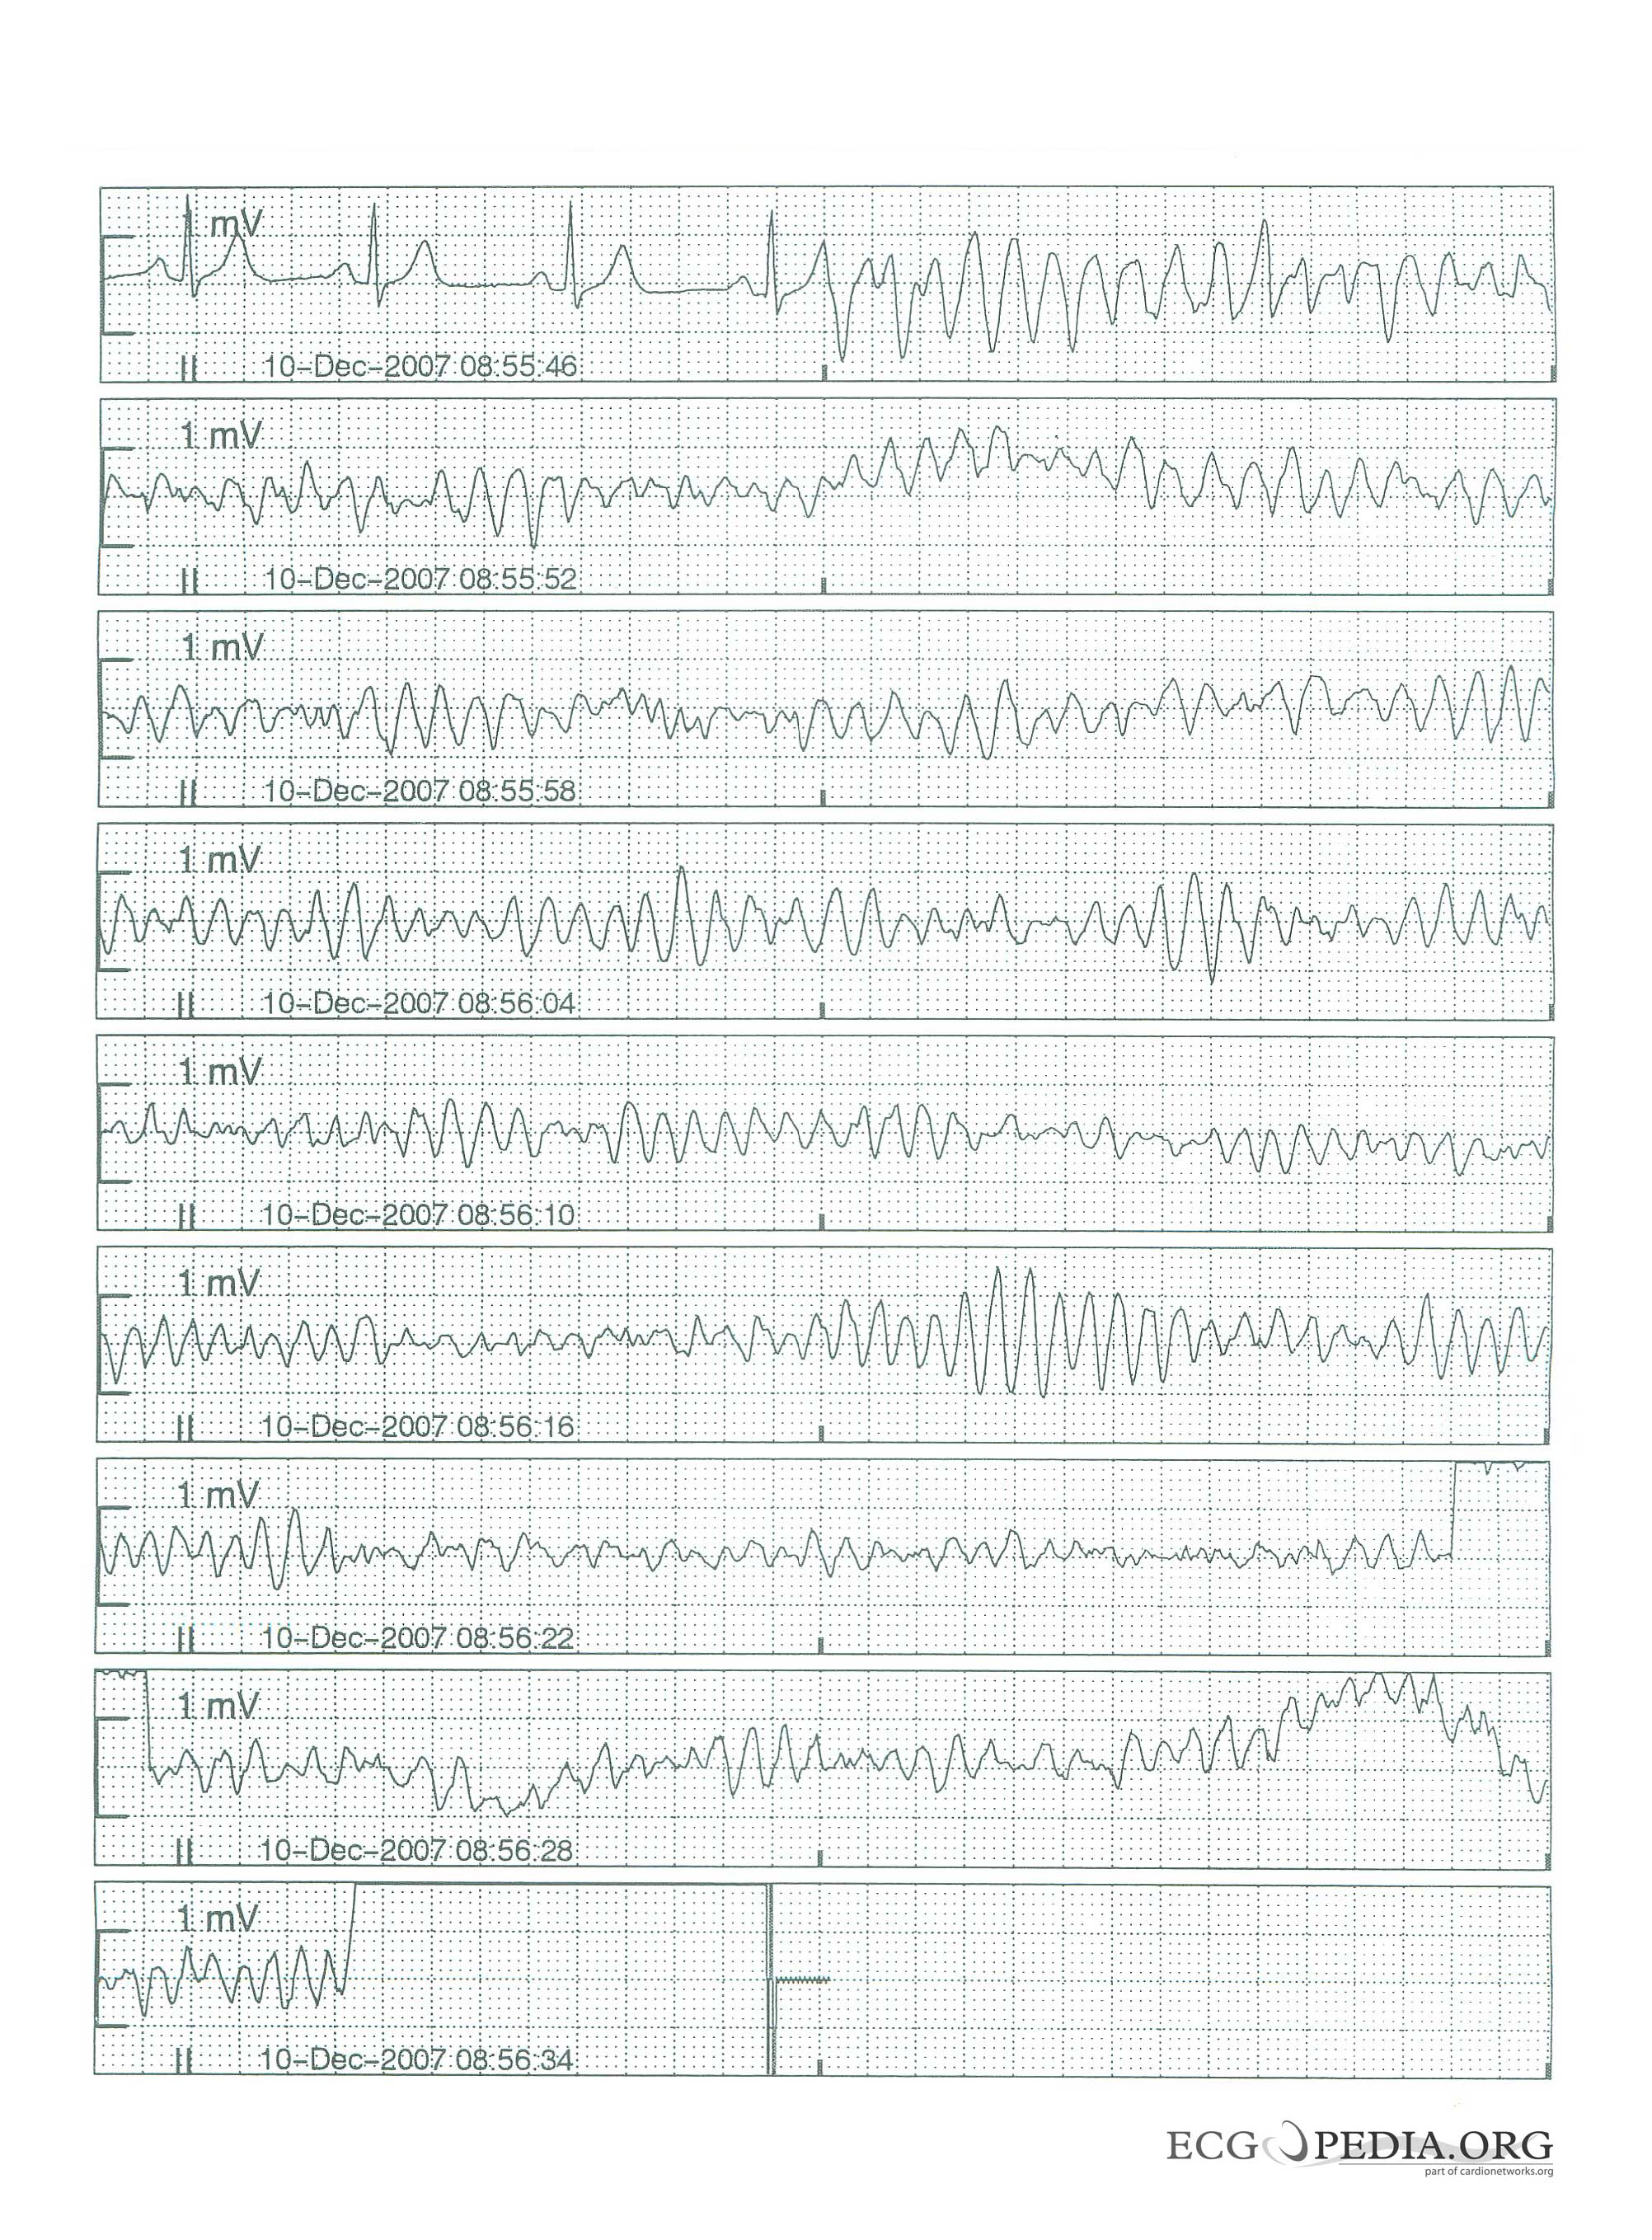 Arrhythmias in a patient with short coupled torsades de pointes degenerating in ventricular fibrillation[7]